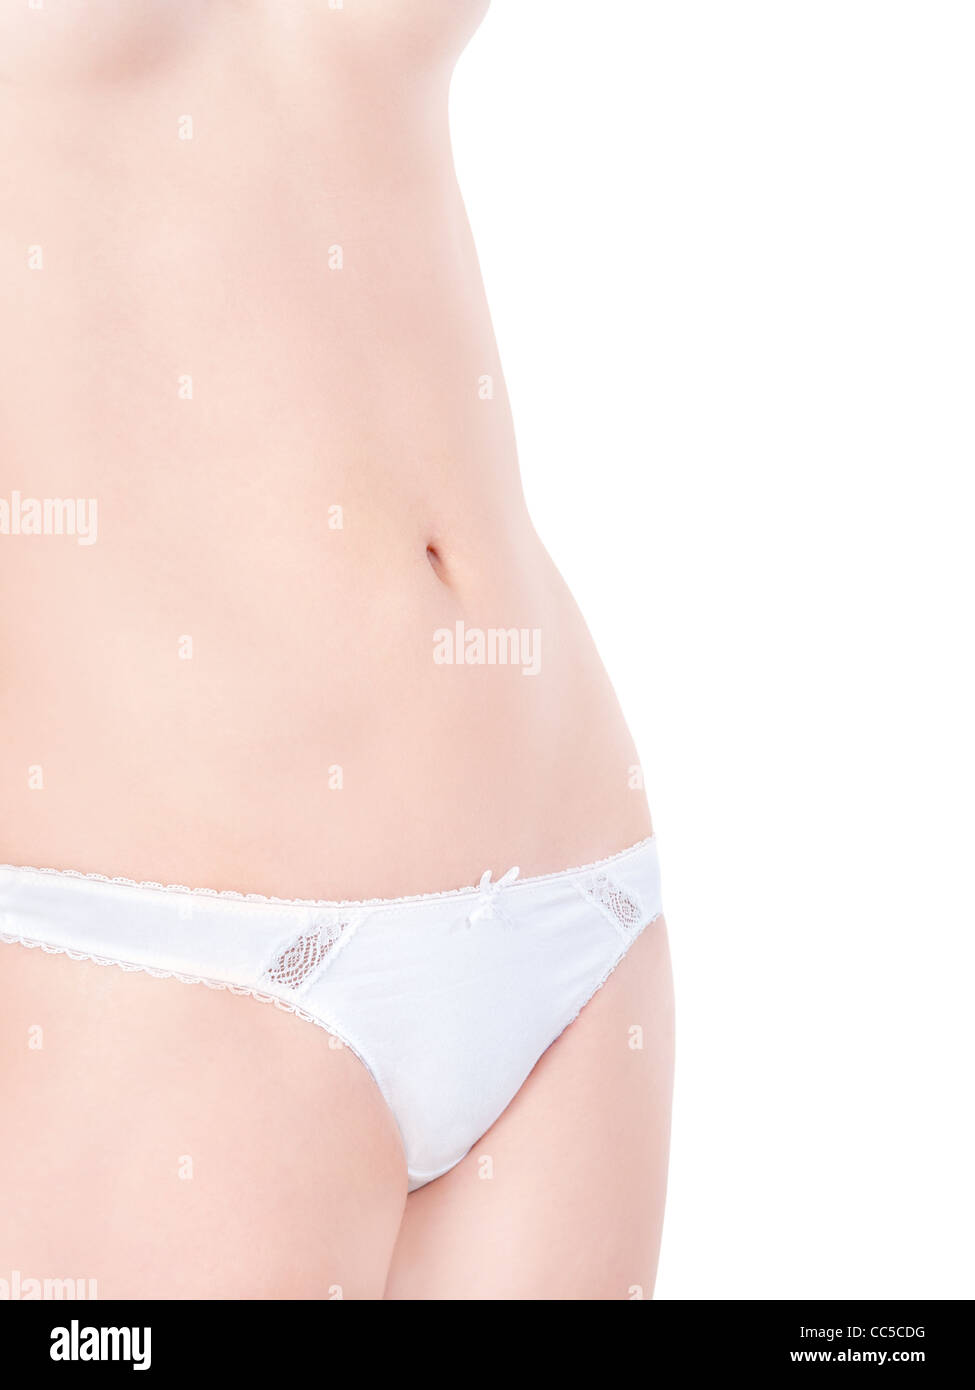 https://c8.alamy.com/comp/CC5CDG/closeup-of-a-beautiful-nude-woman-in-white-cotton-panties-isolated-CC5CDG.jpg